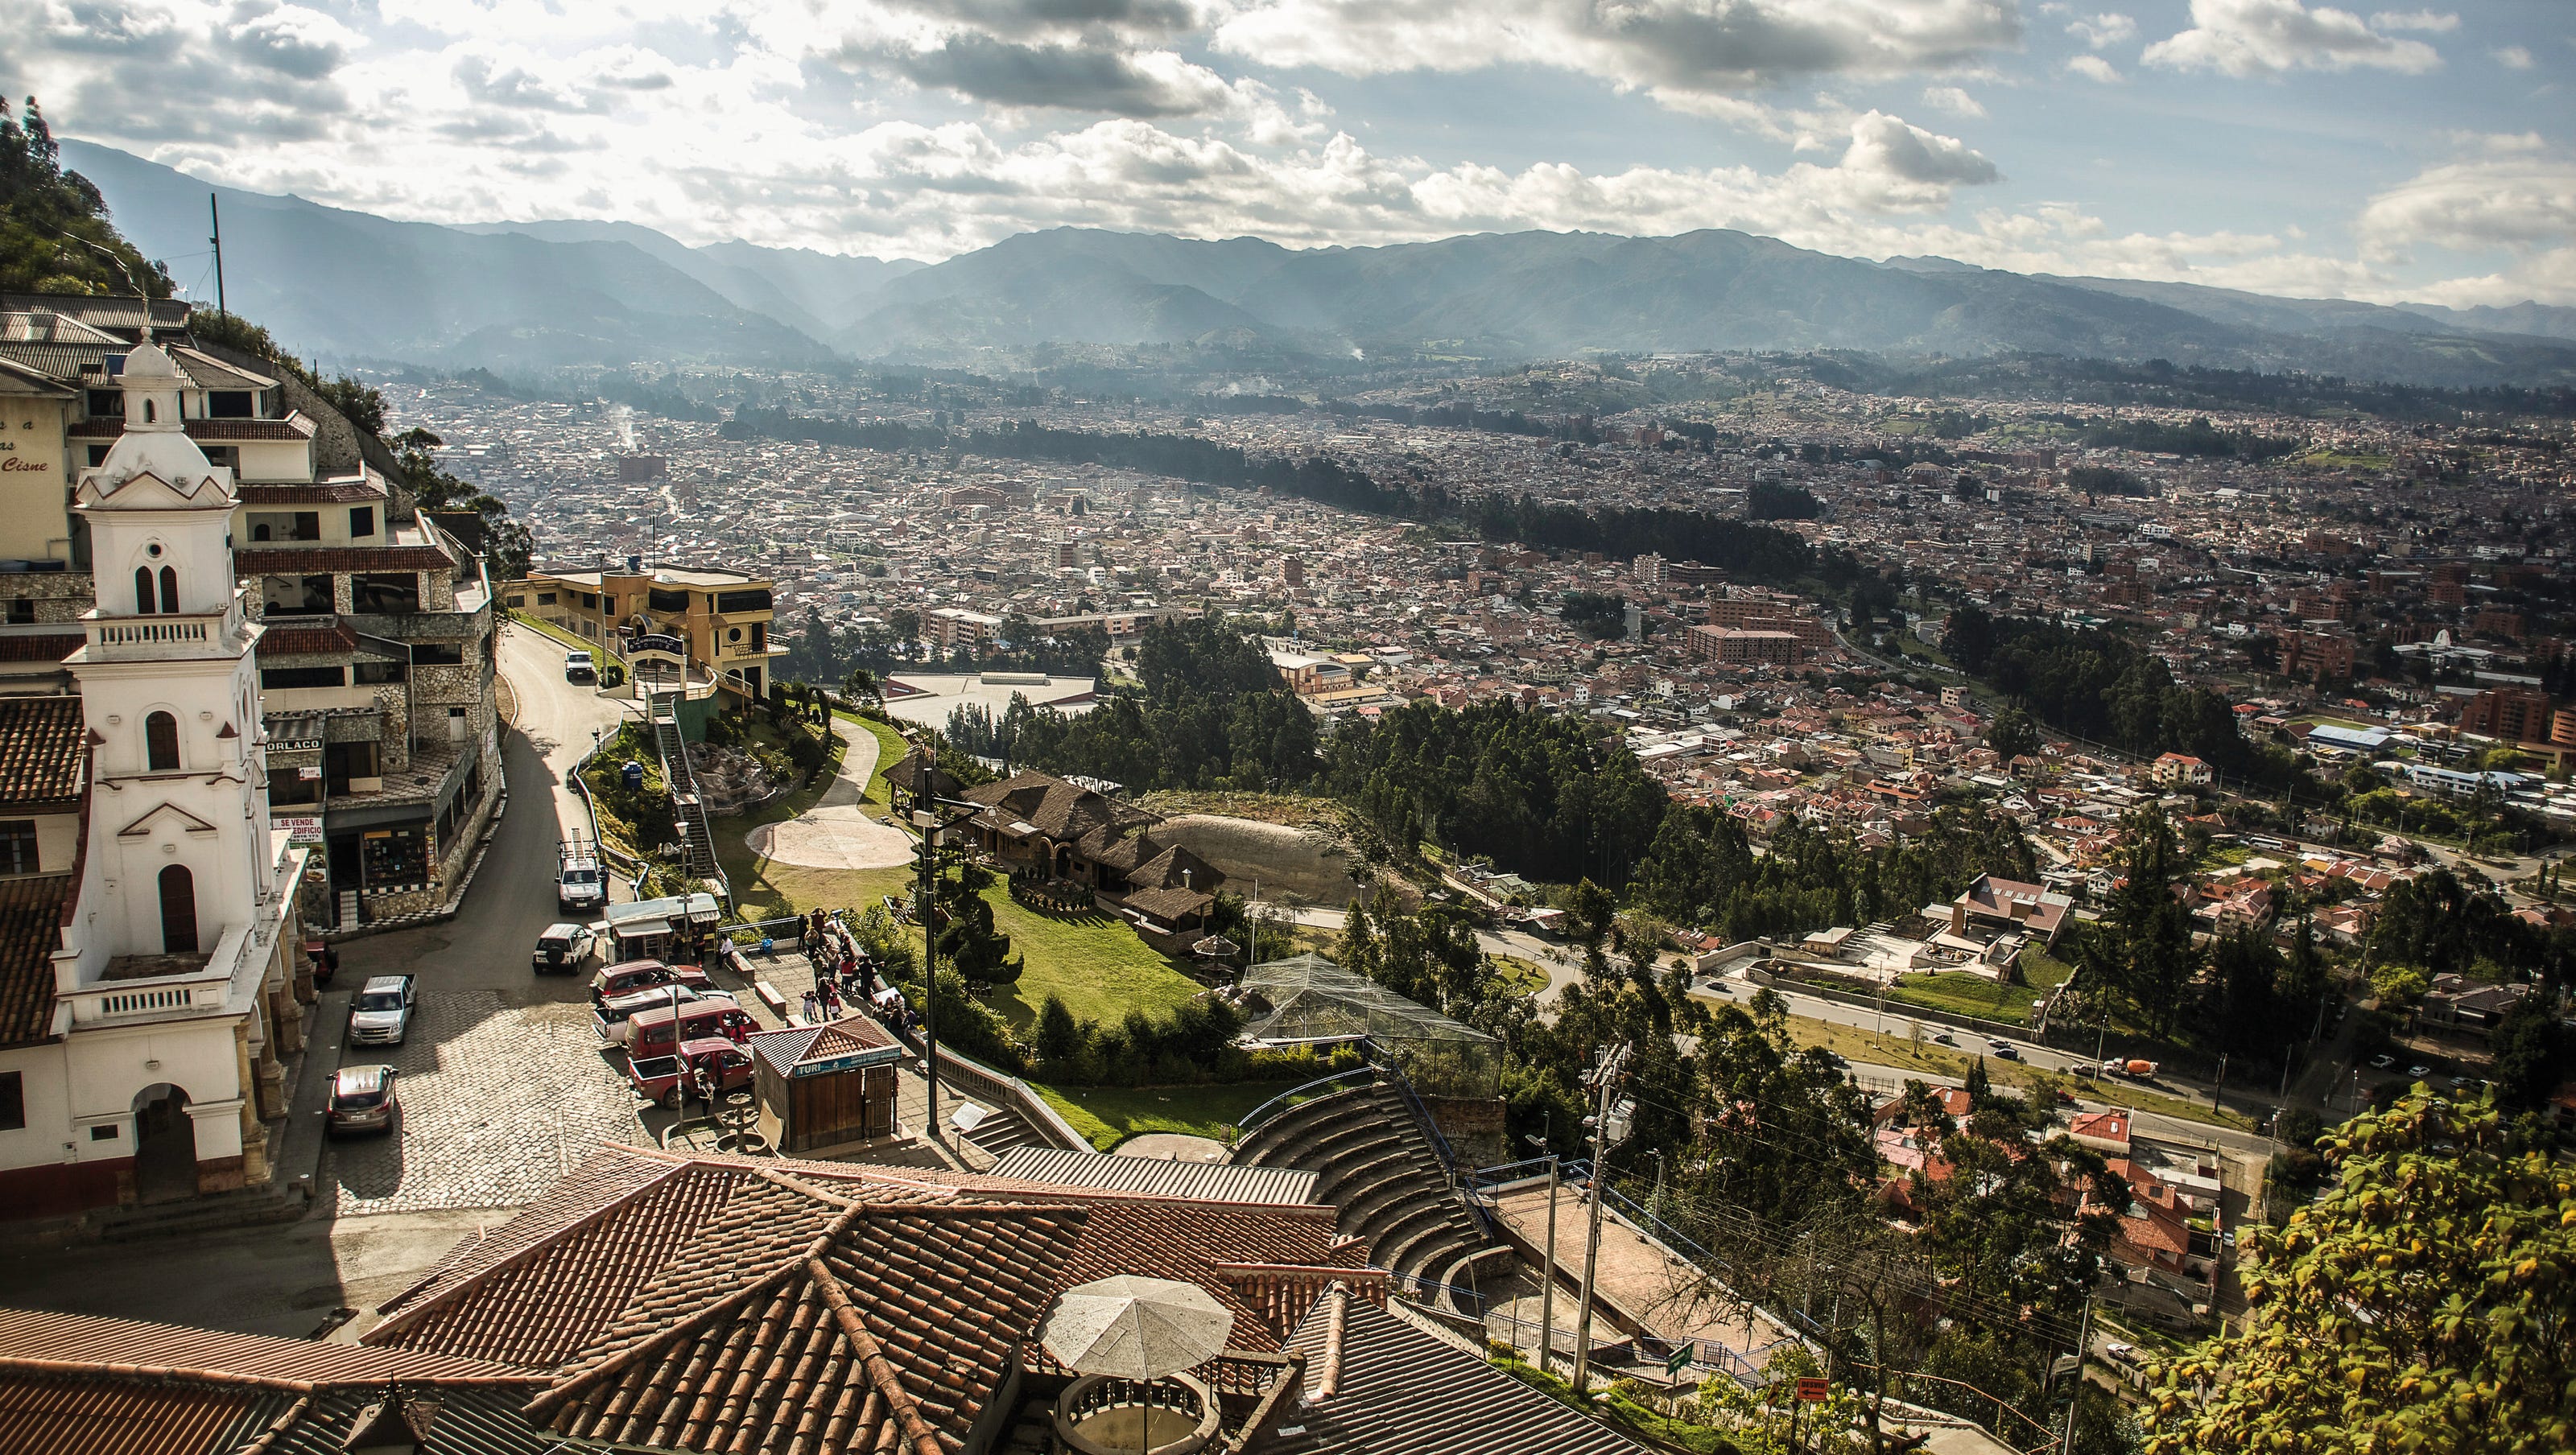 News Without Politics. Guess which city in the Andes is good for retirement?